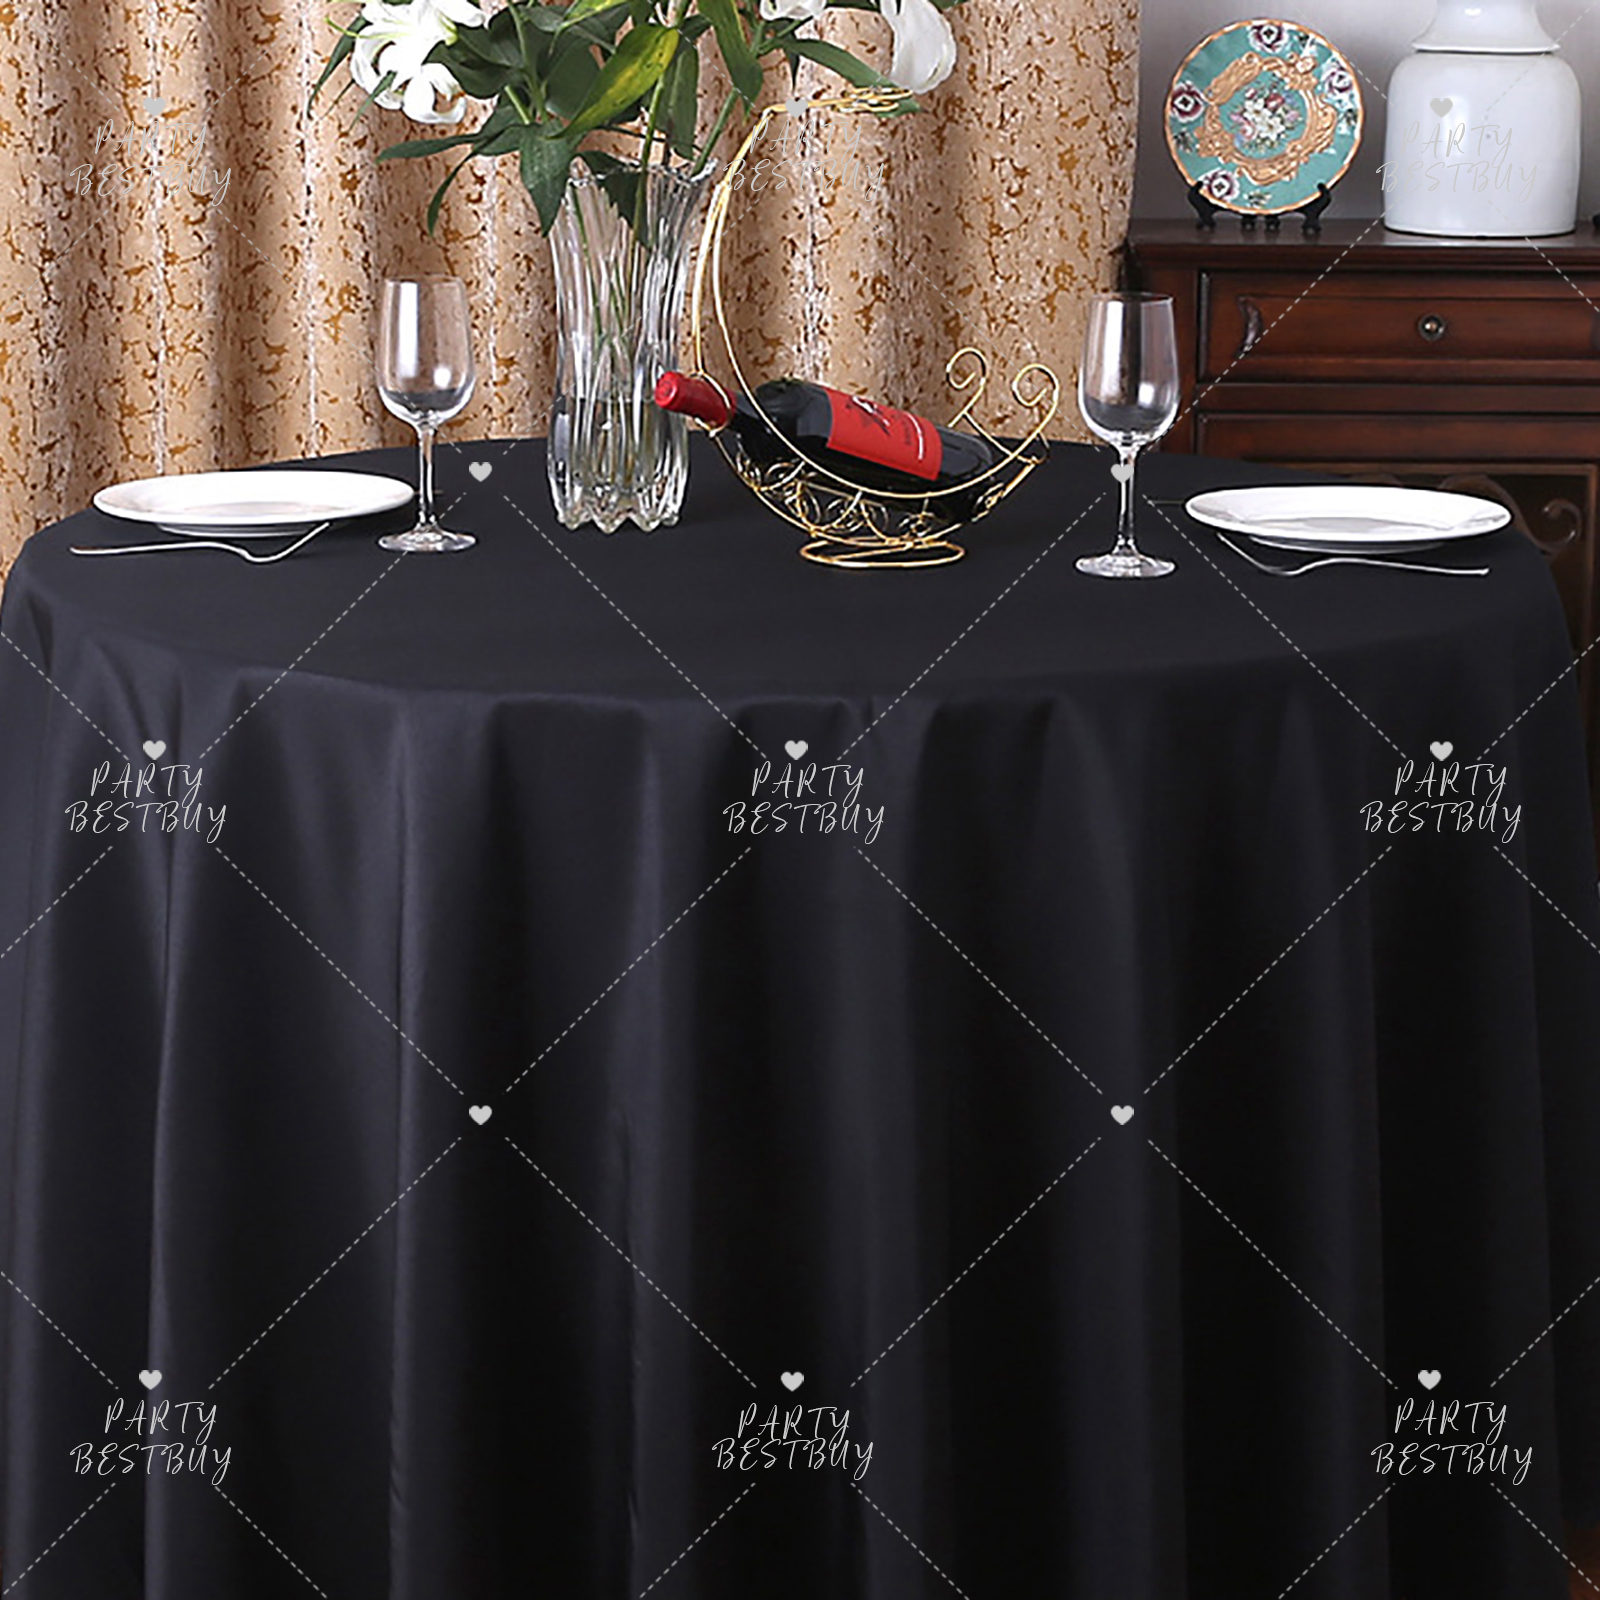 Wedding Event Party Tableware Covers, Black Round Tablecloth